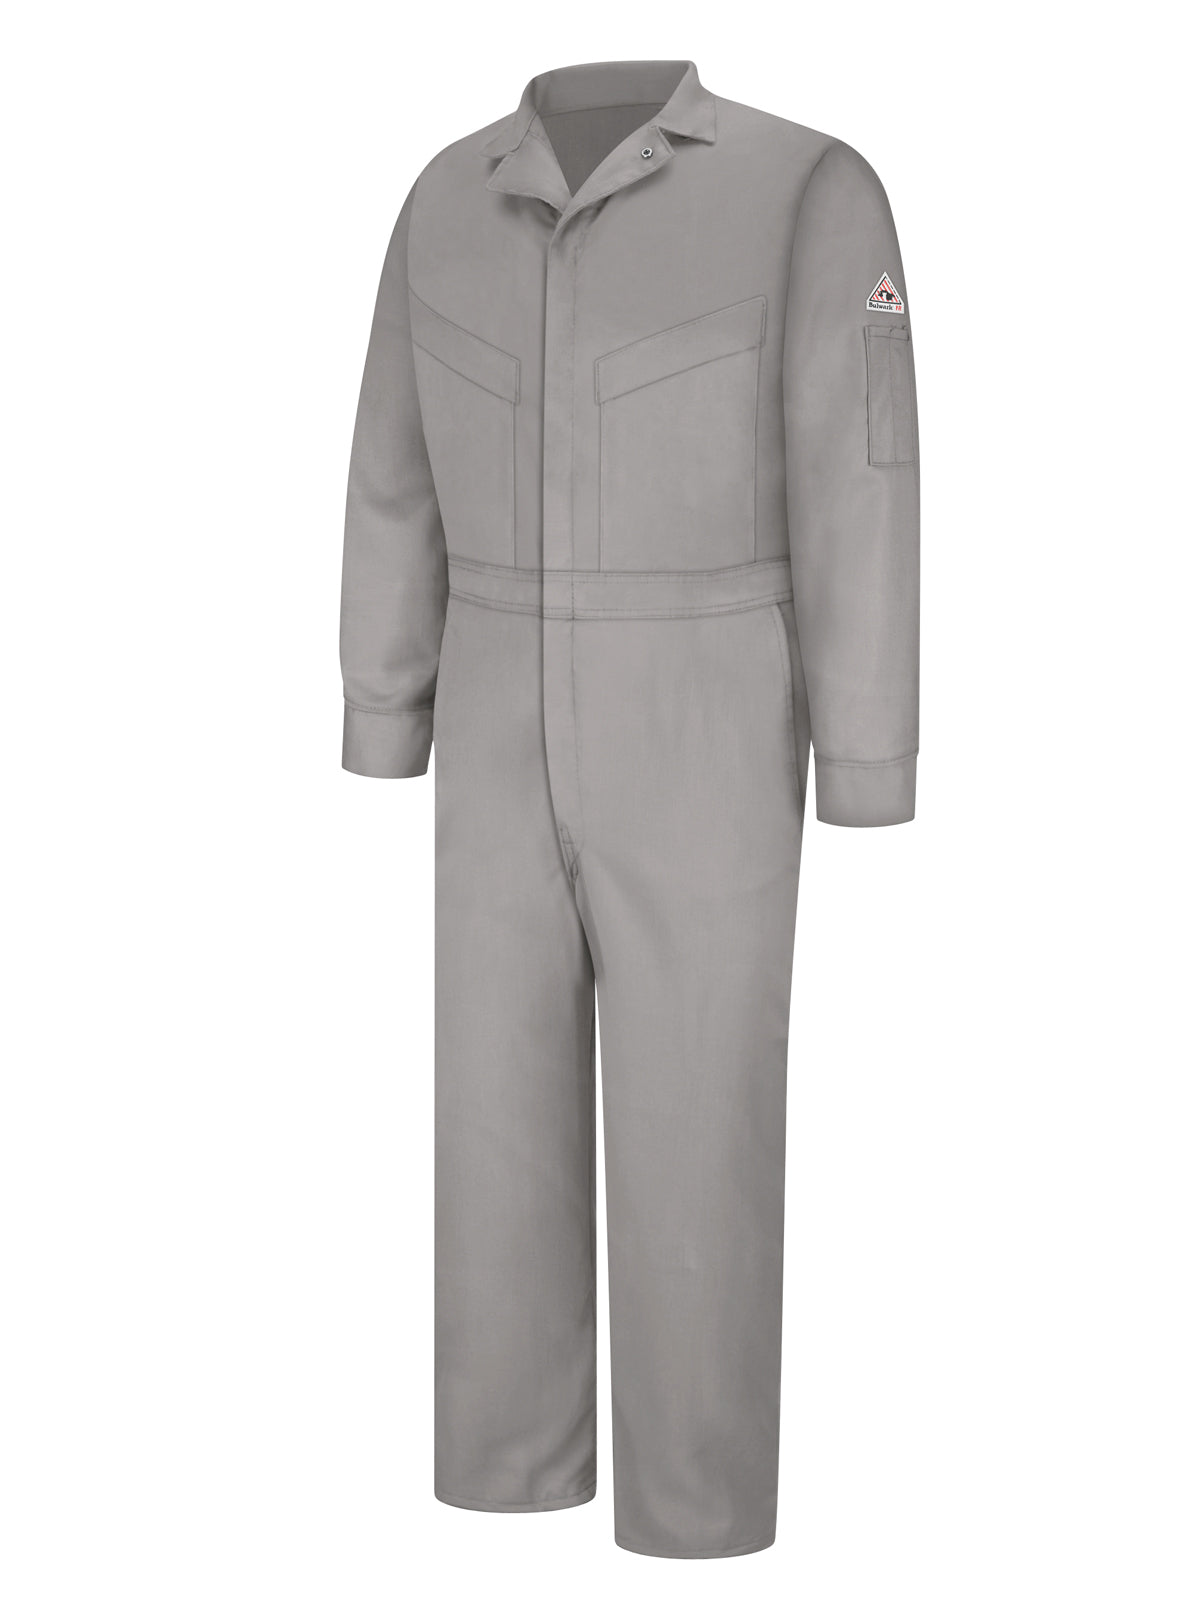 Men's Lightweight Excel Flame-Resistant Deluxe Coverall - CLD6 - Grey